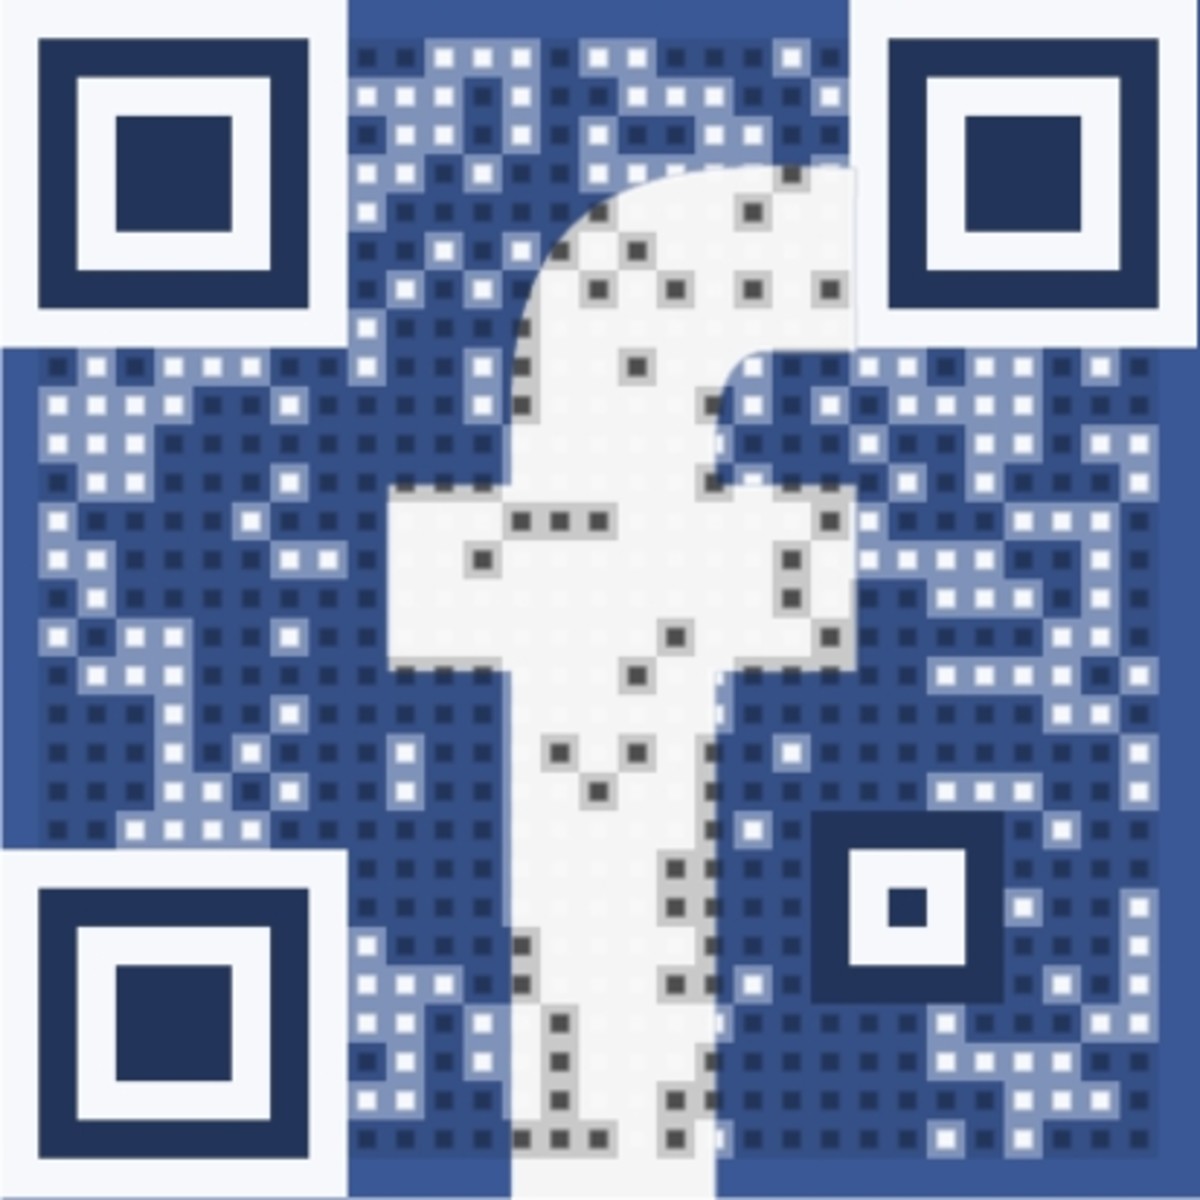 Here is a "juiced" up QR code that when scanned will take you directly to Hub Pages Face Book.  Creating QR codes is easy and can be crafted to take you to any internet web site, blog, or even a specific Hub Page article like this one.